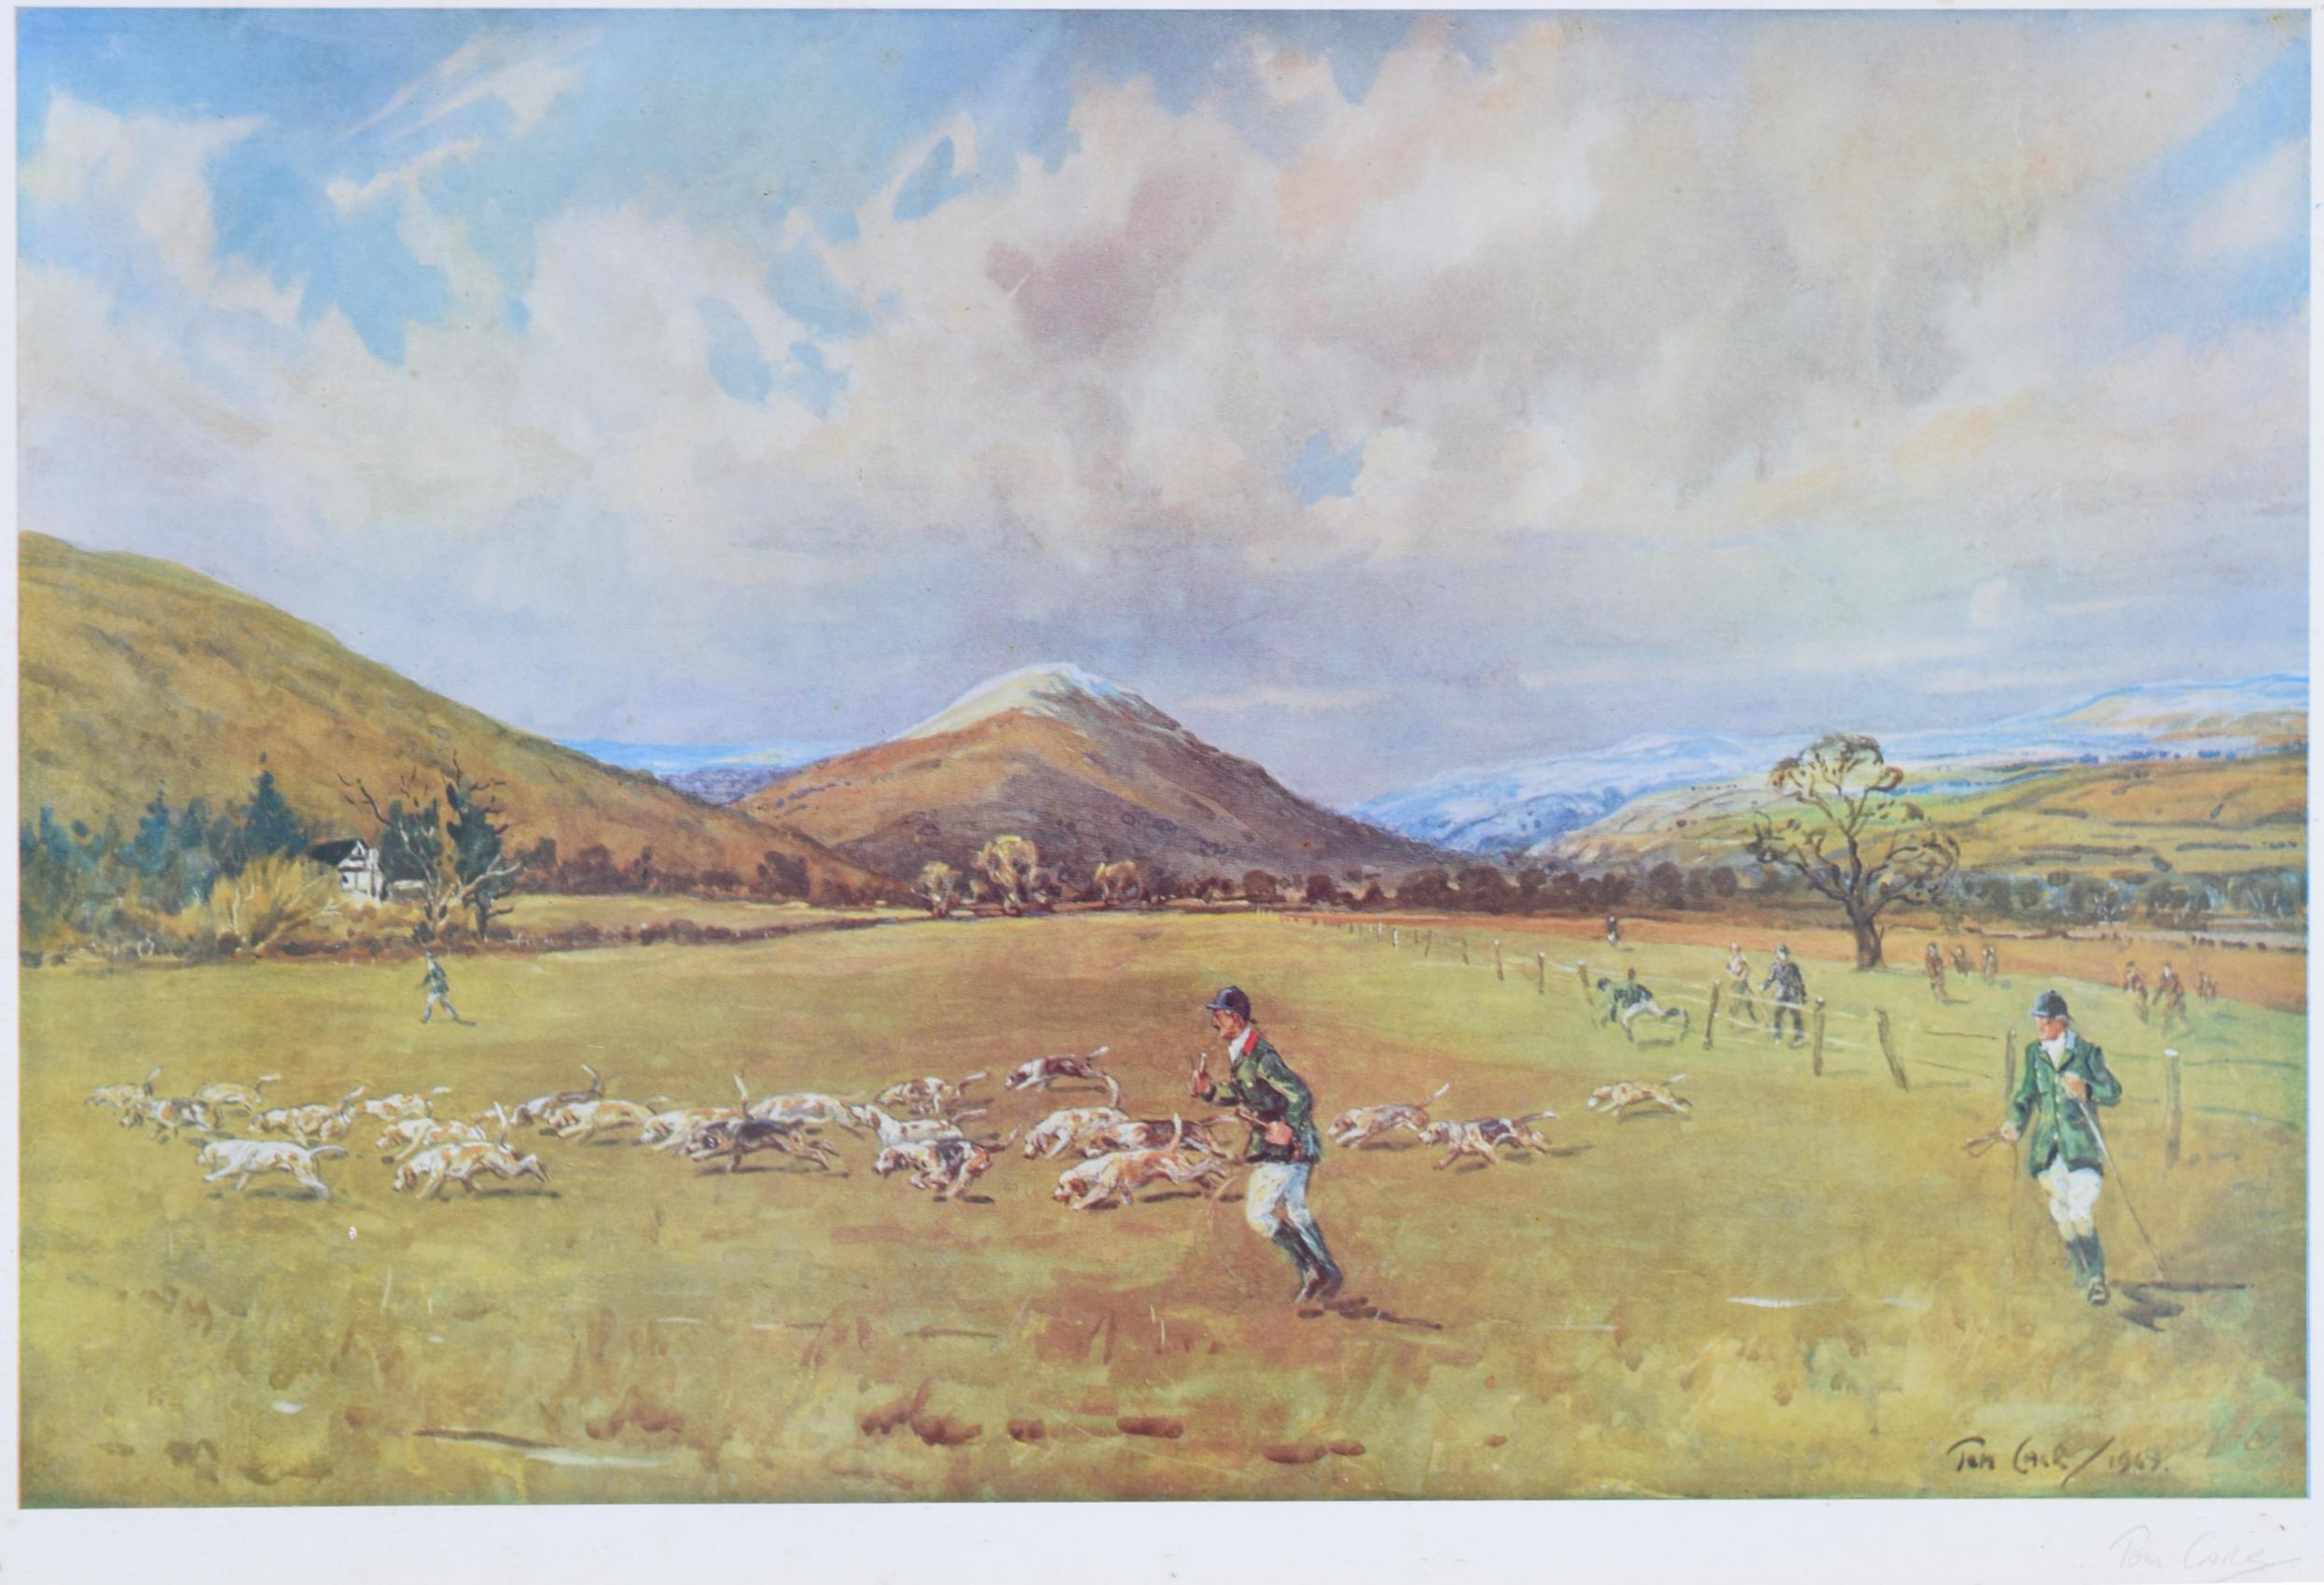 Tom Carr (1912 - 1977)
The Shropshire Beagles
Chromolithograph
33 x 48 cm

Signed in pencil lower right.

A classic Carr hunting etching depicting the Shropshire Beagles.

Tom Carr was a painter of hunting and racing scenes. He was born in Durham